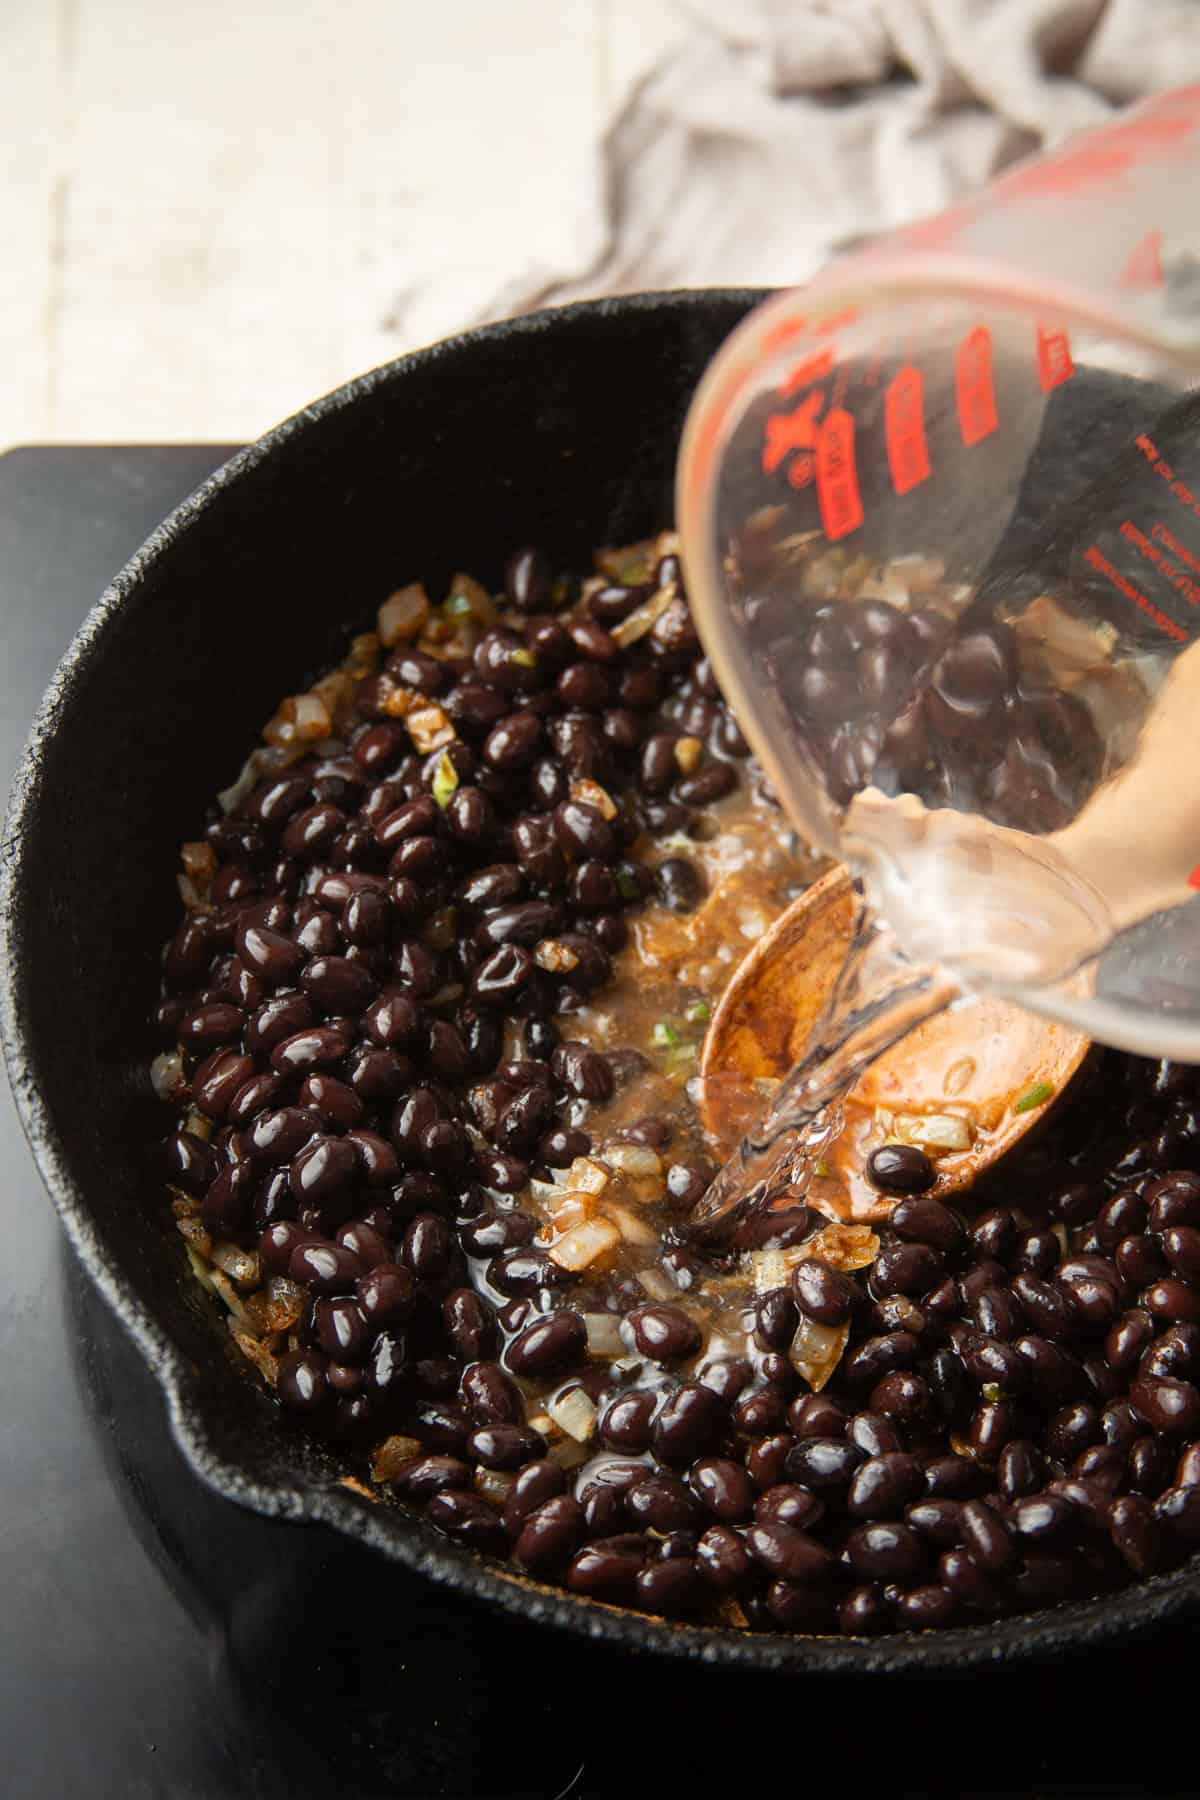 Water being poured into a skillet of black beans.